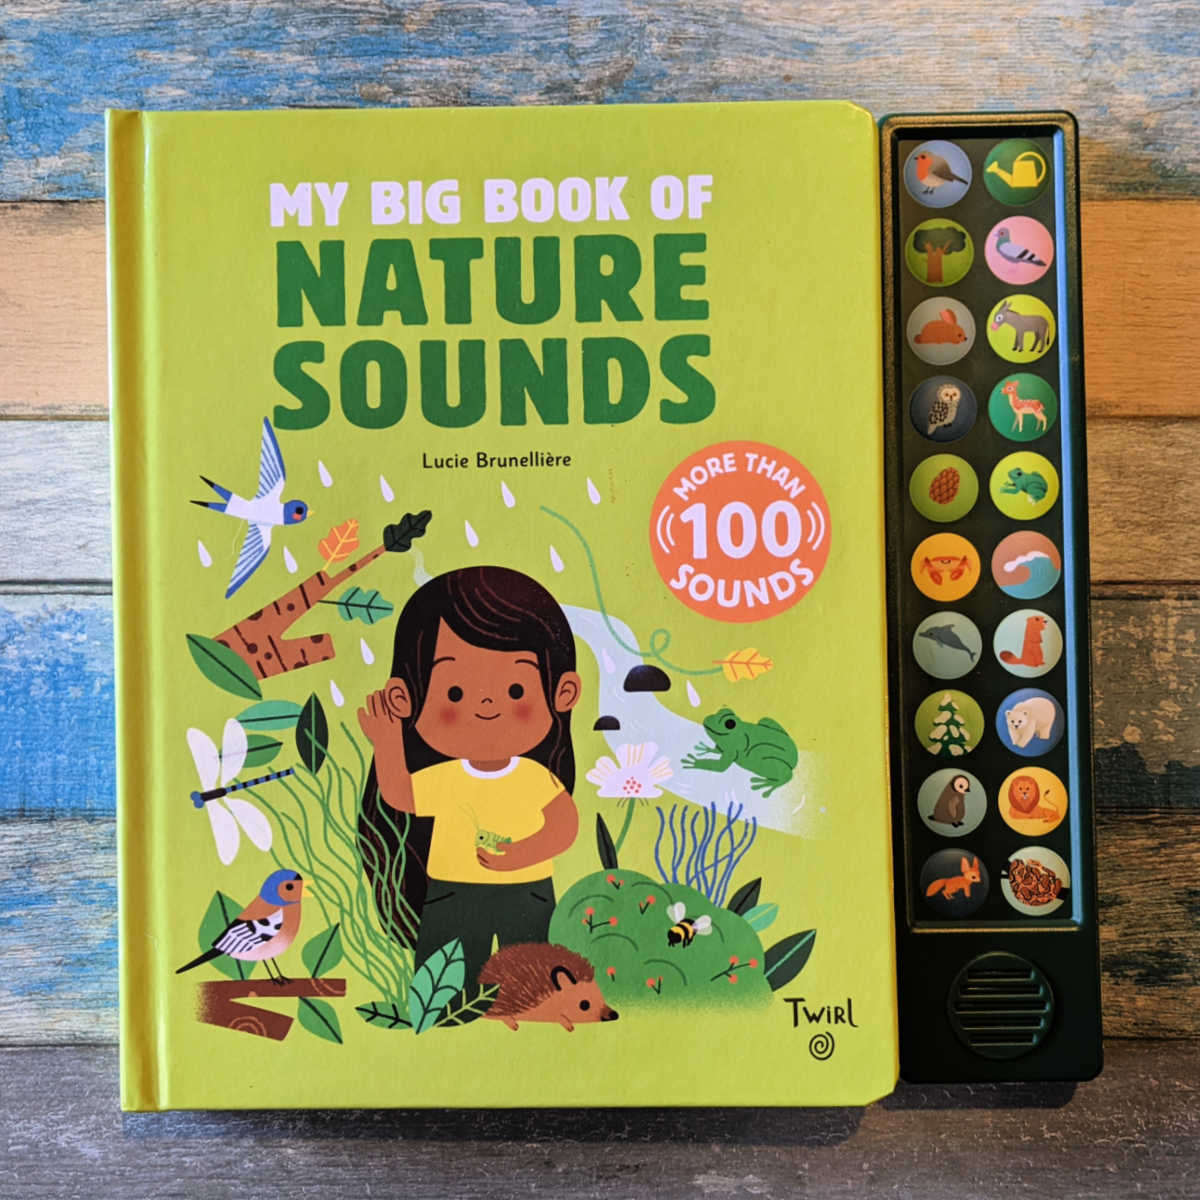 Little ones will love My Big Book of Nature Sounds as they interact with the words, cute illustrations and push button sounds.